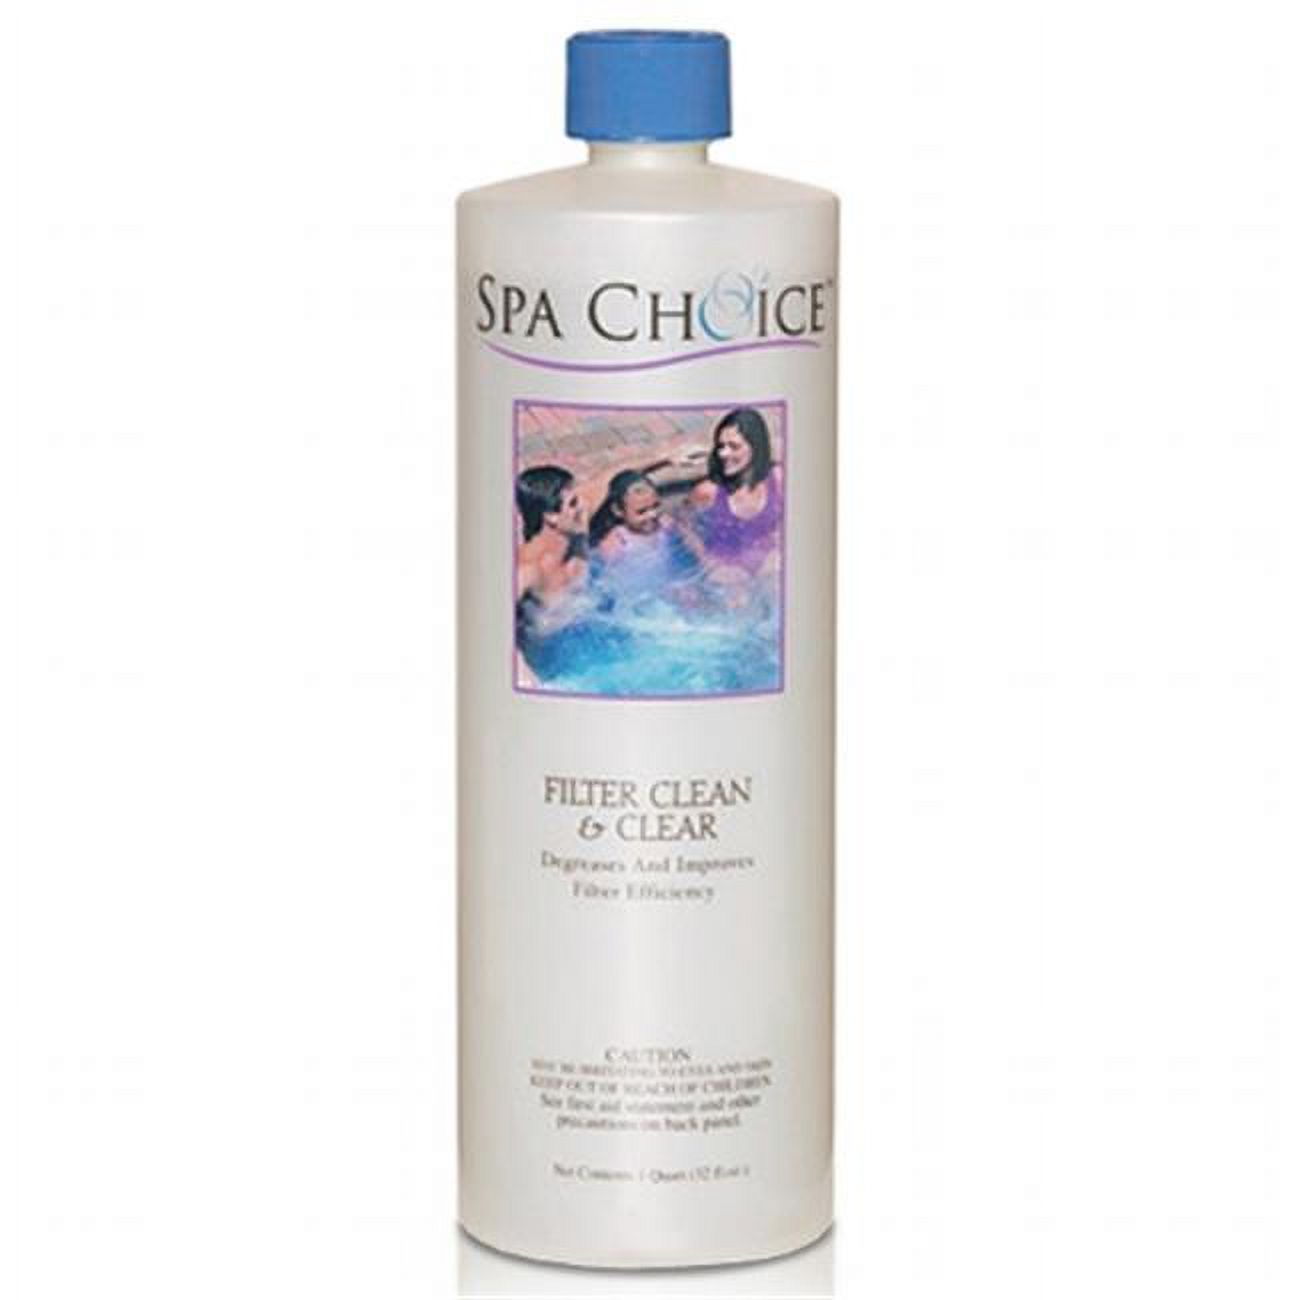 Spa Choice 472-3-2021 Filter Clean & Clear - image 1 of 2